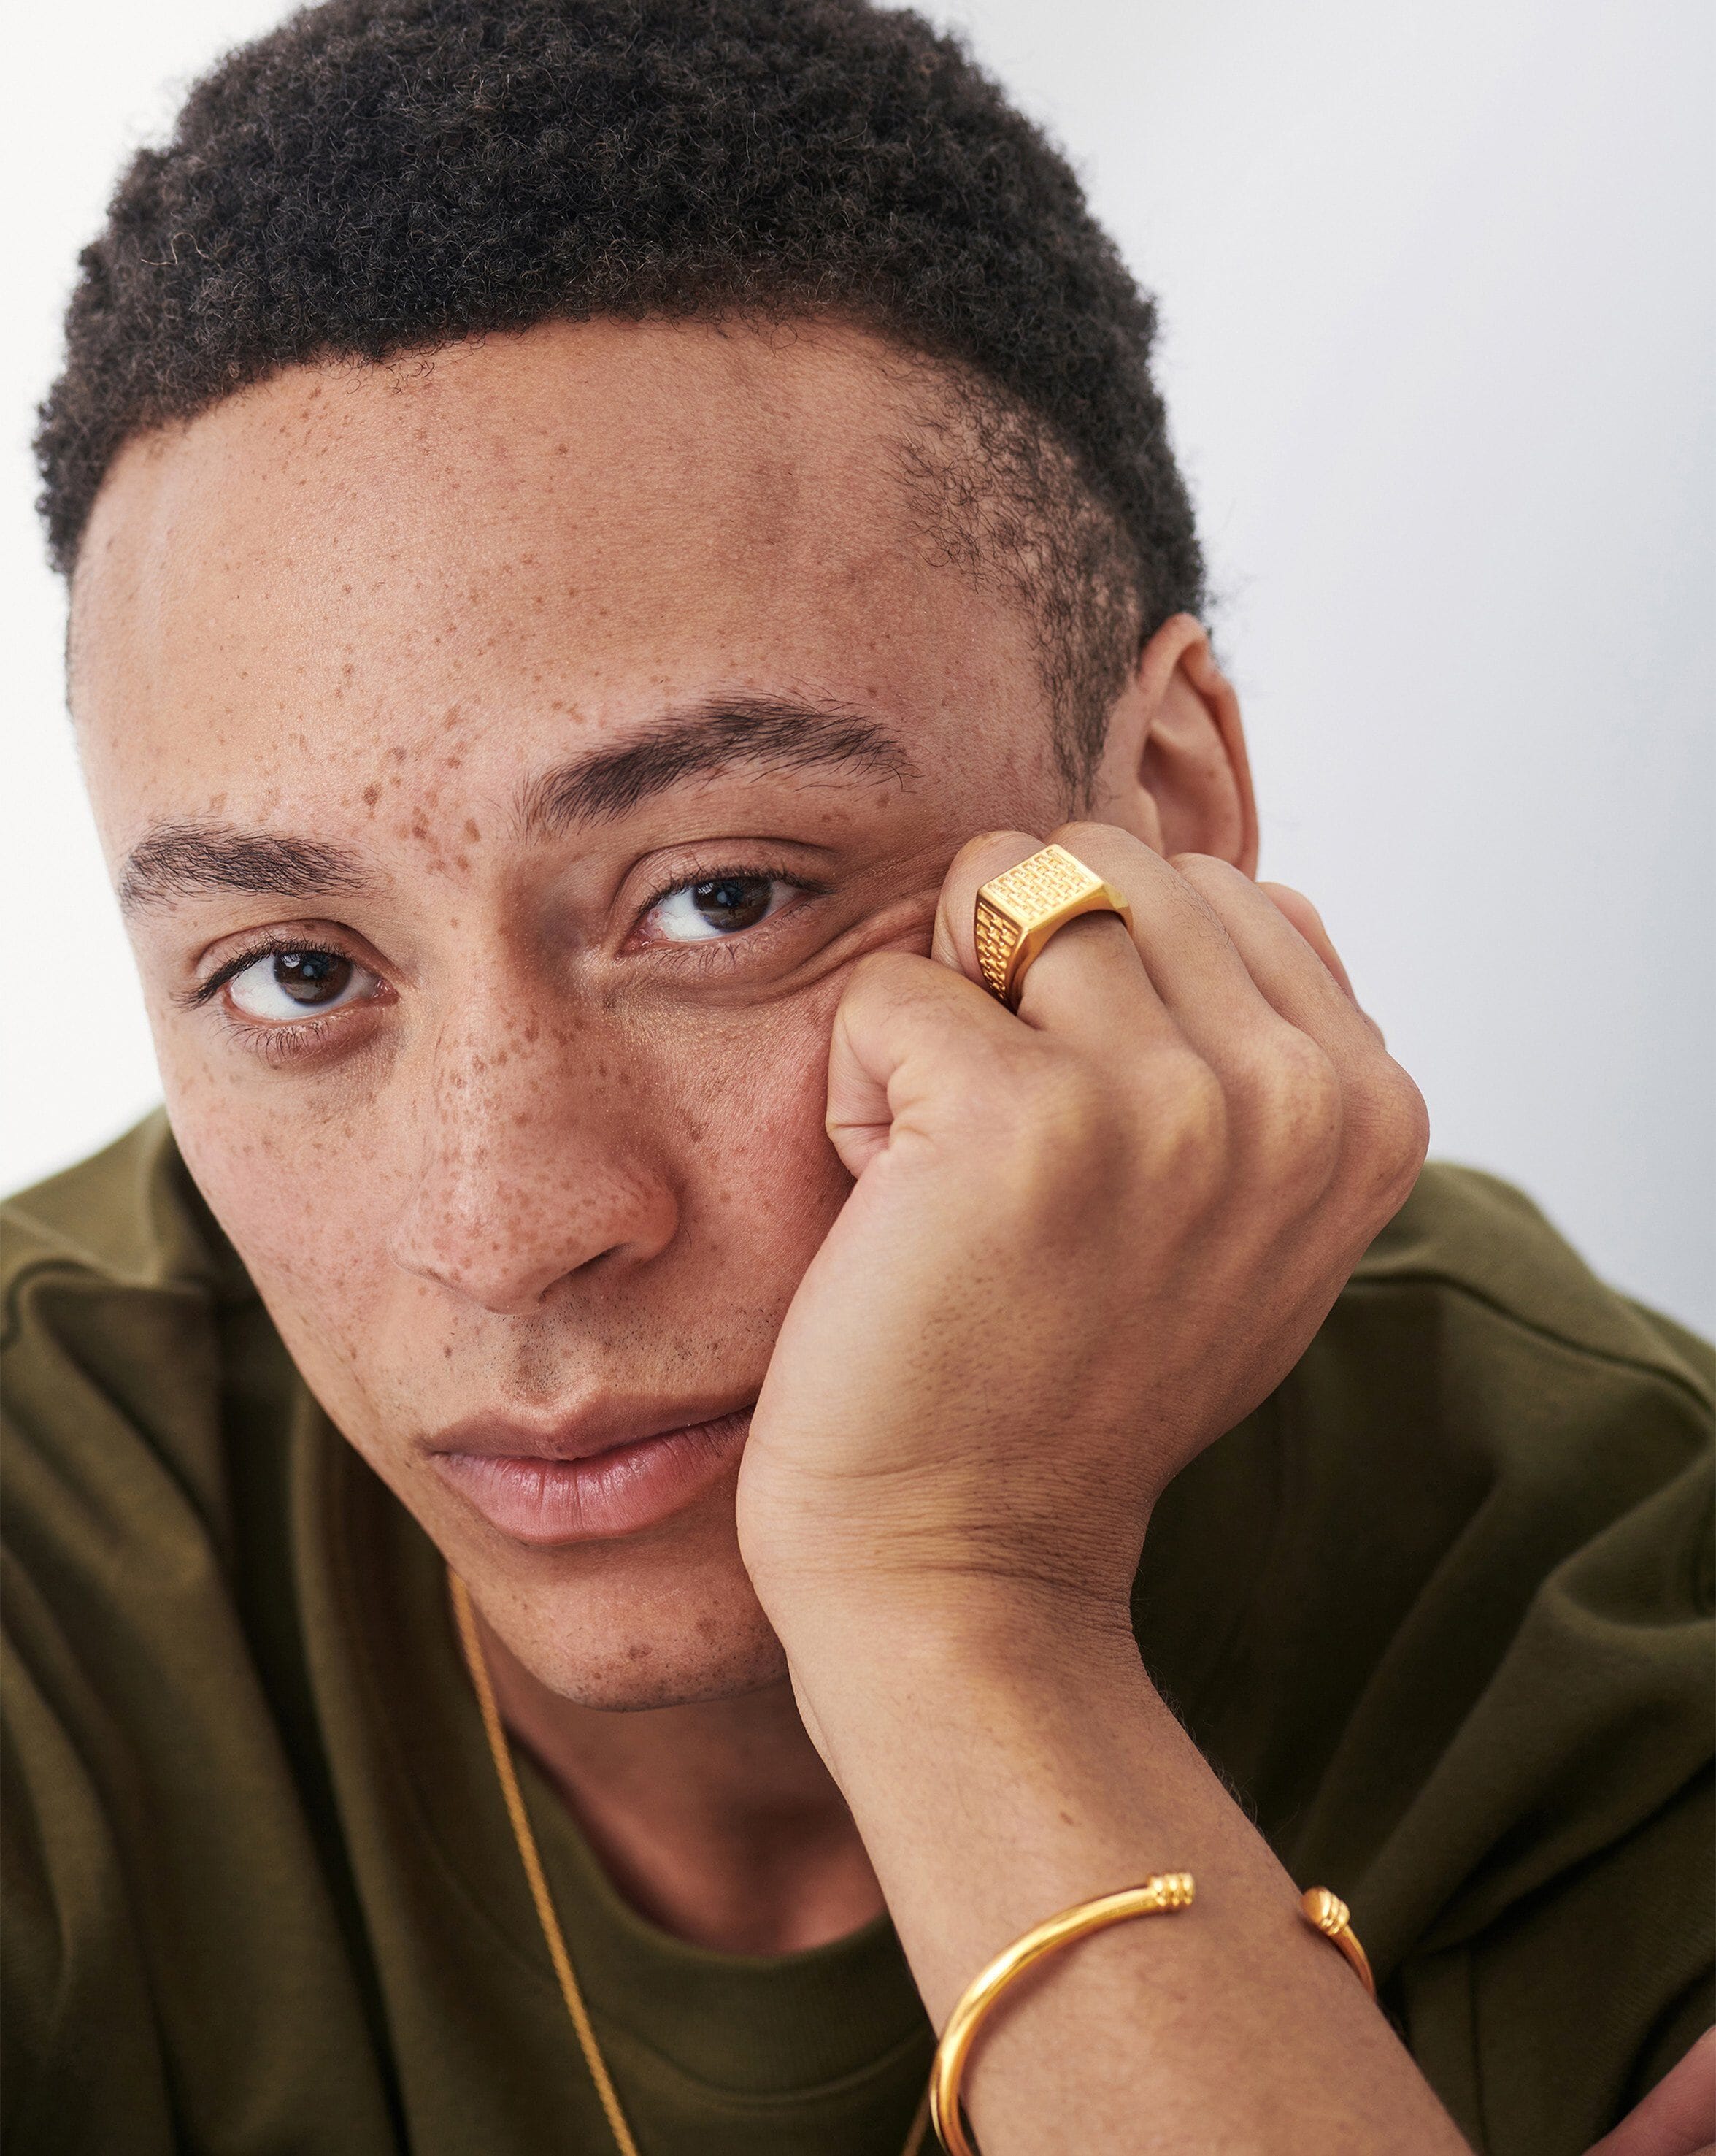 Fused Woven Square Signet Ring | 18ct Gold Plated Vermeil Rings Missoma 